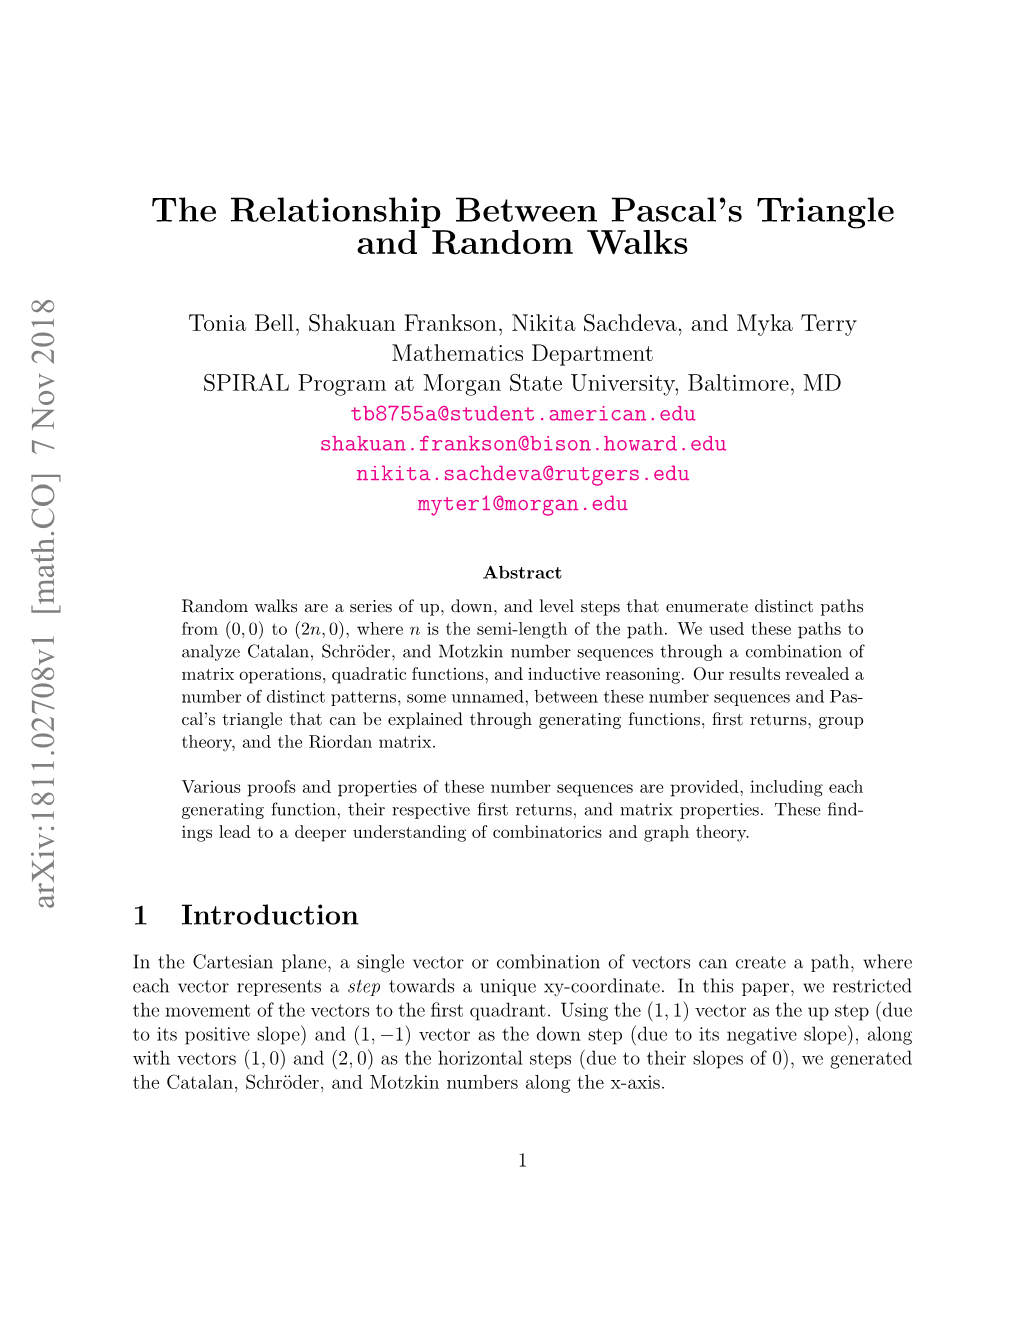 The Relationship Between Pascal's Triangle and Random Walks